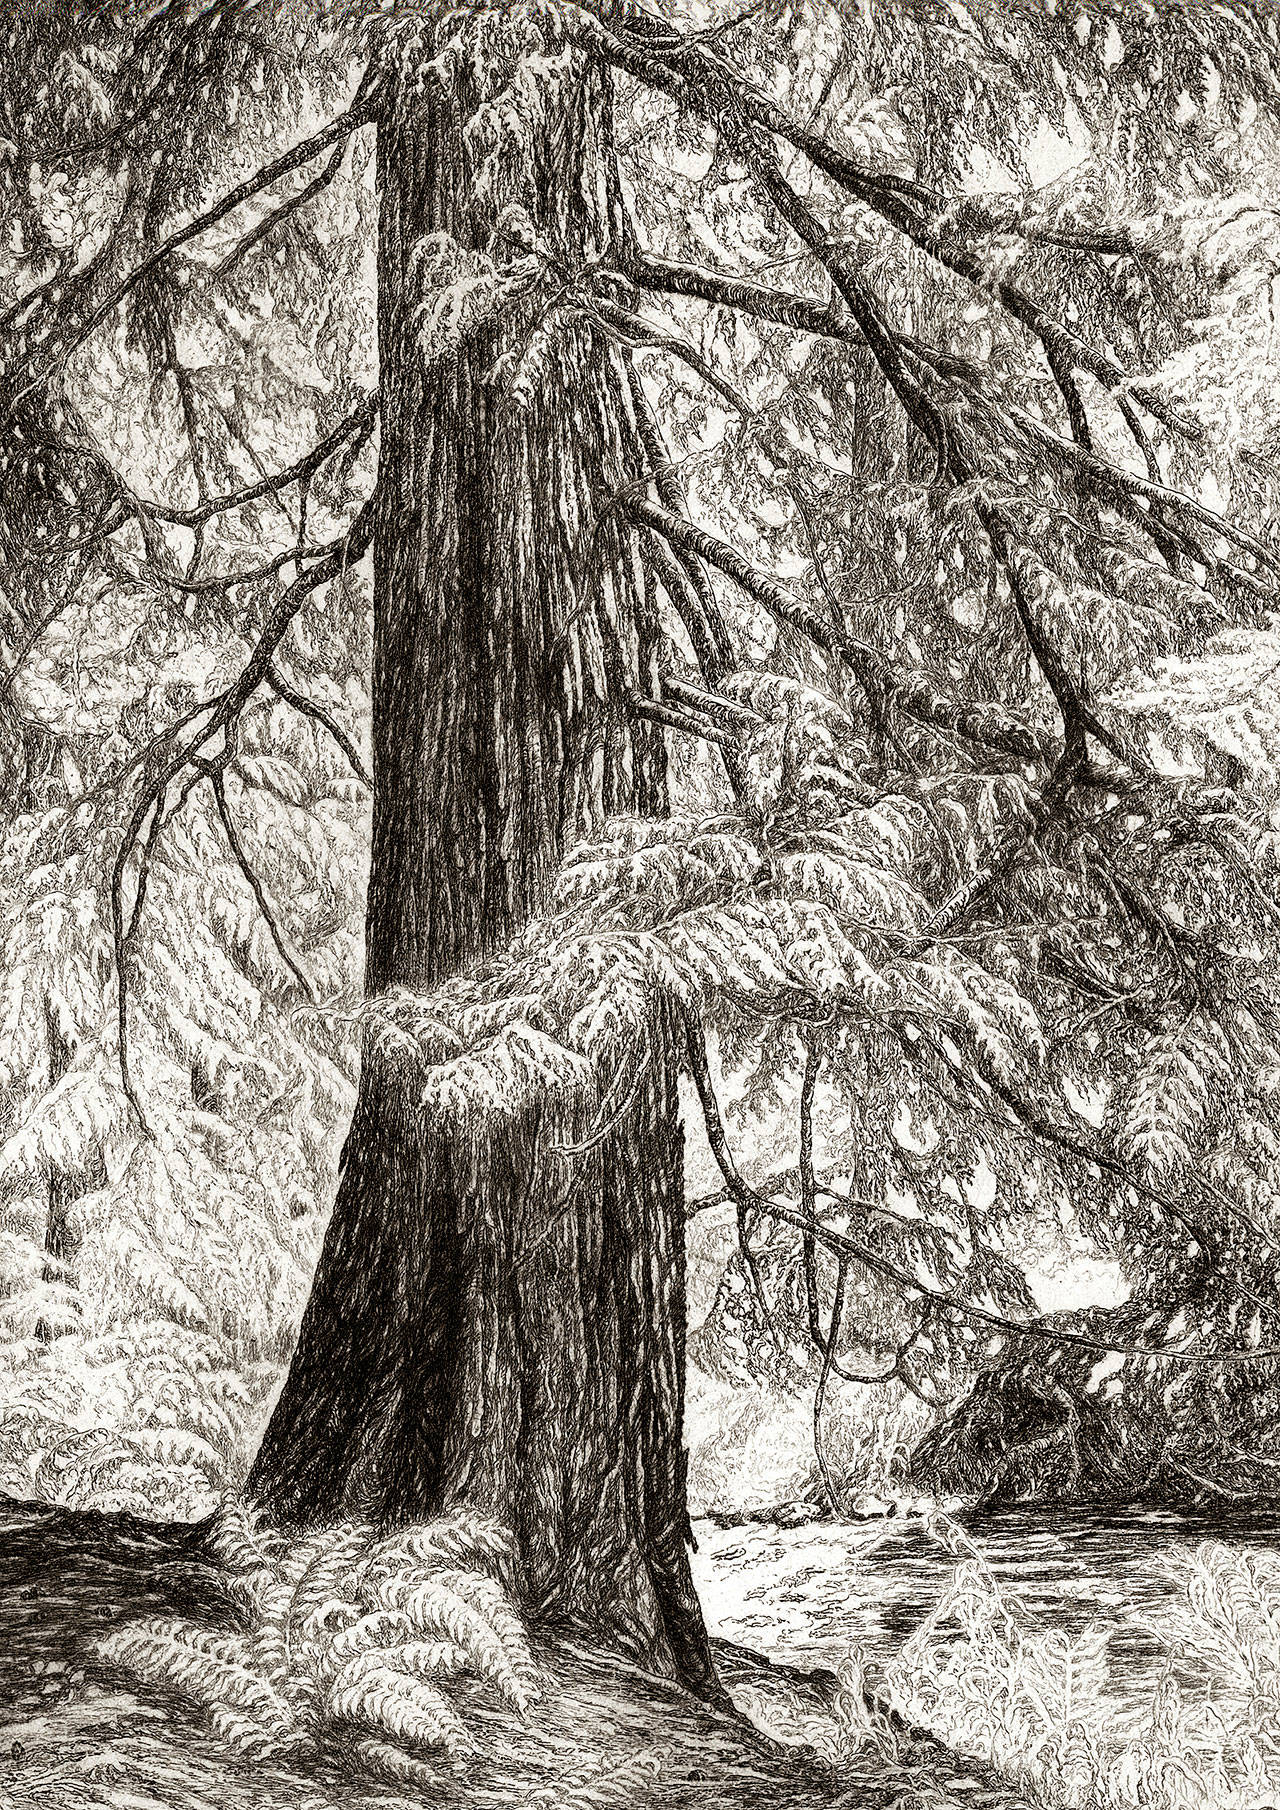 Helen Loggie’s “Hosanna” is an etching made in 1960, and is part of the new exhibit at Cascadia Art Museum in Edmonds.